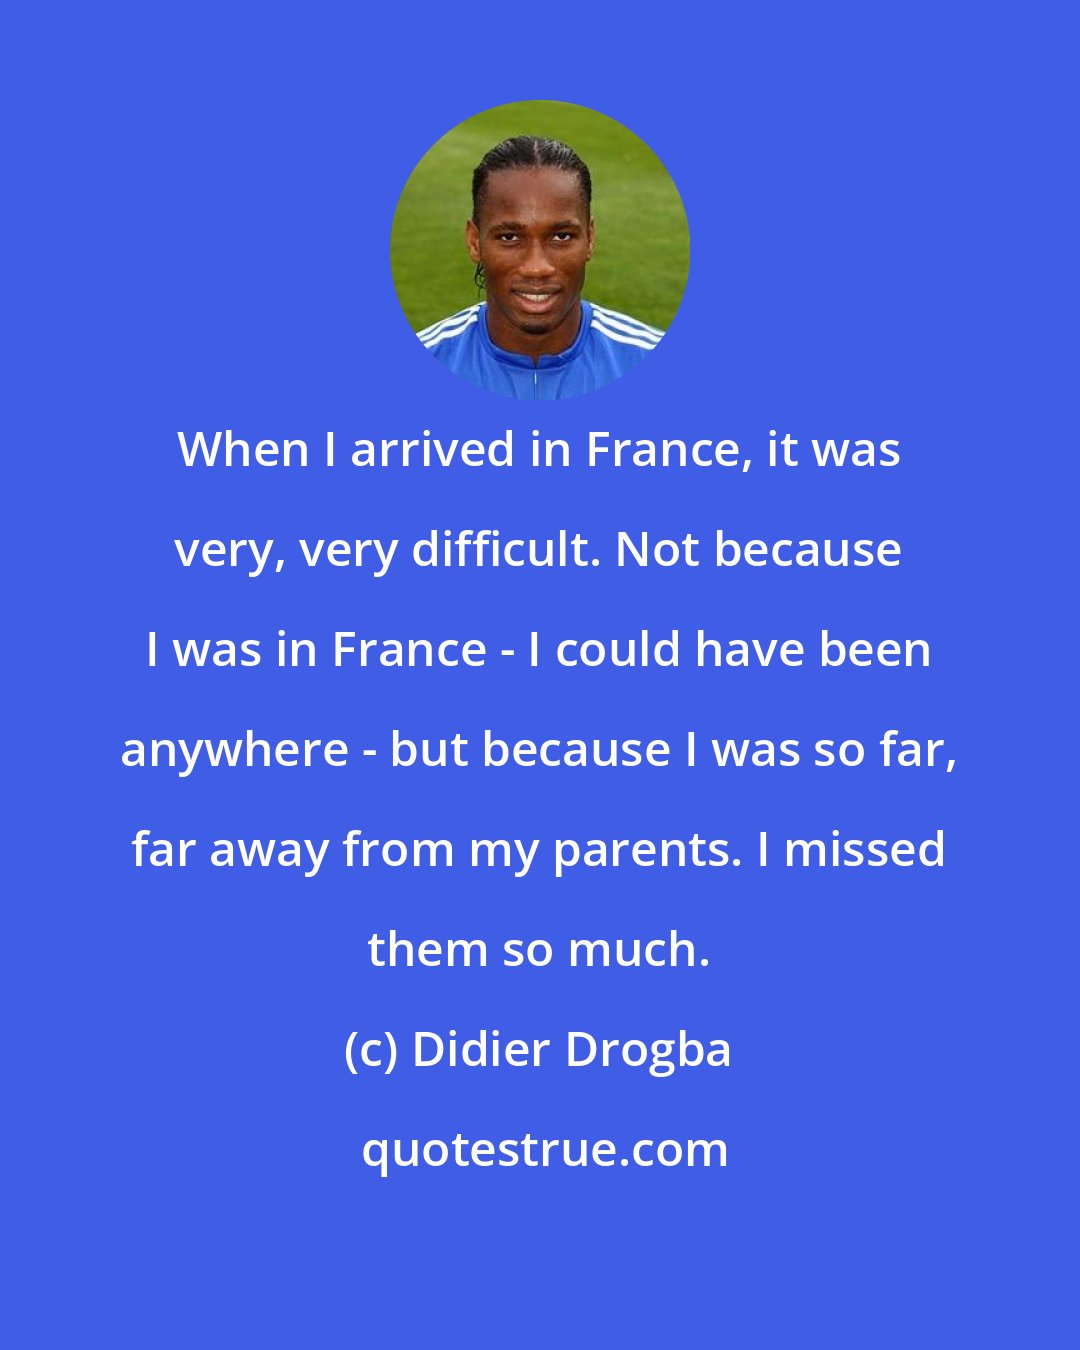 Didier Drogba: When I arrived in France, it was very, very difficult. Not because I was in France - I could have been anywhere - but because I was so far, far away from my parents. I missed them so much.